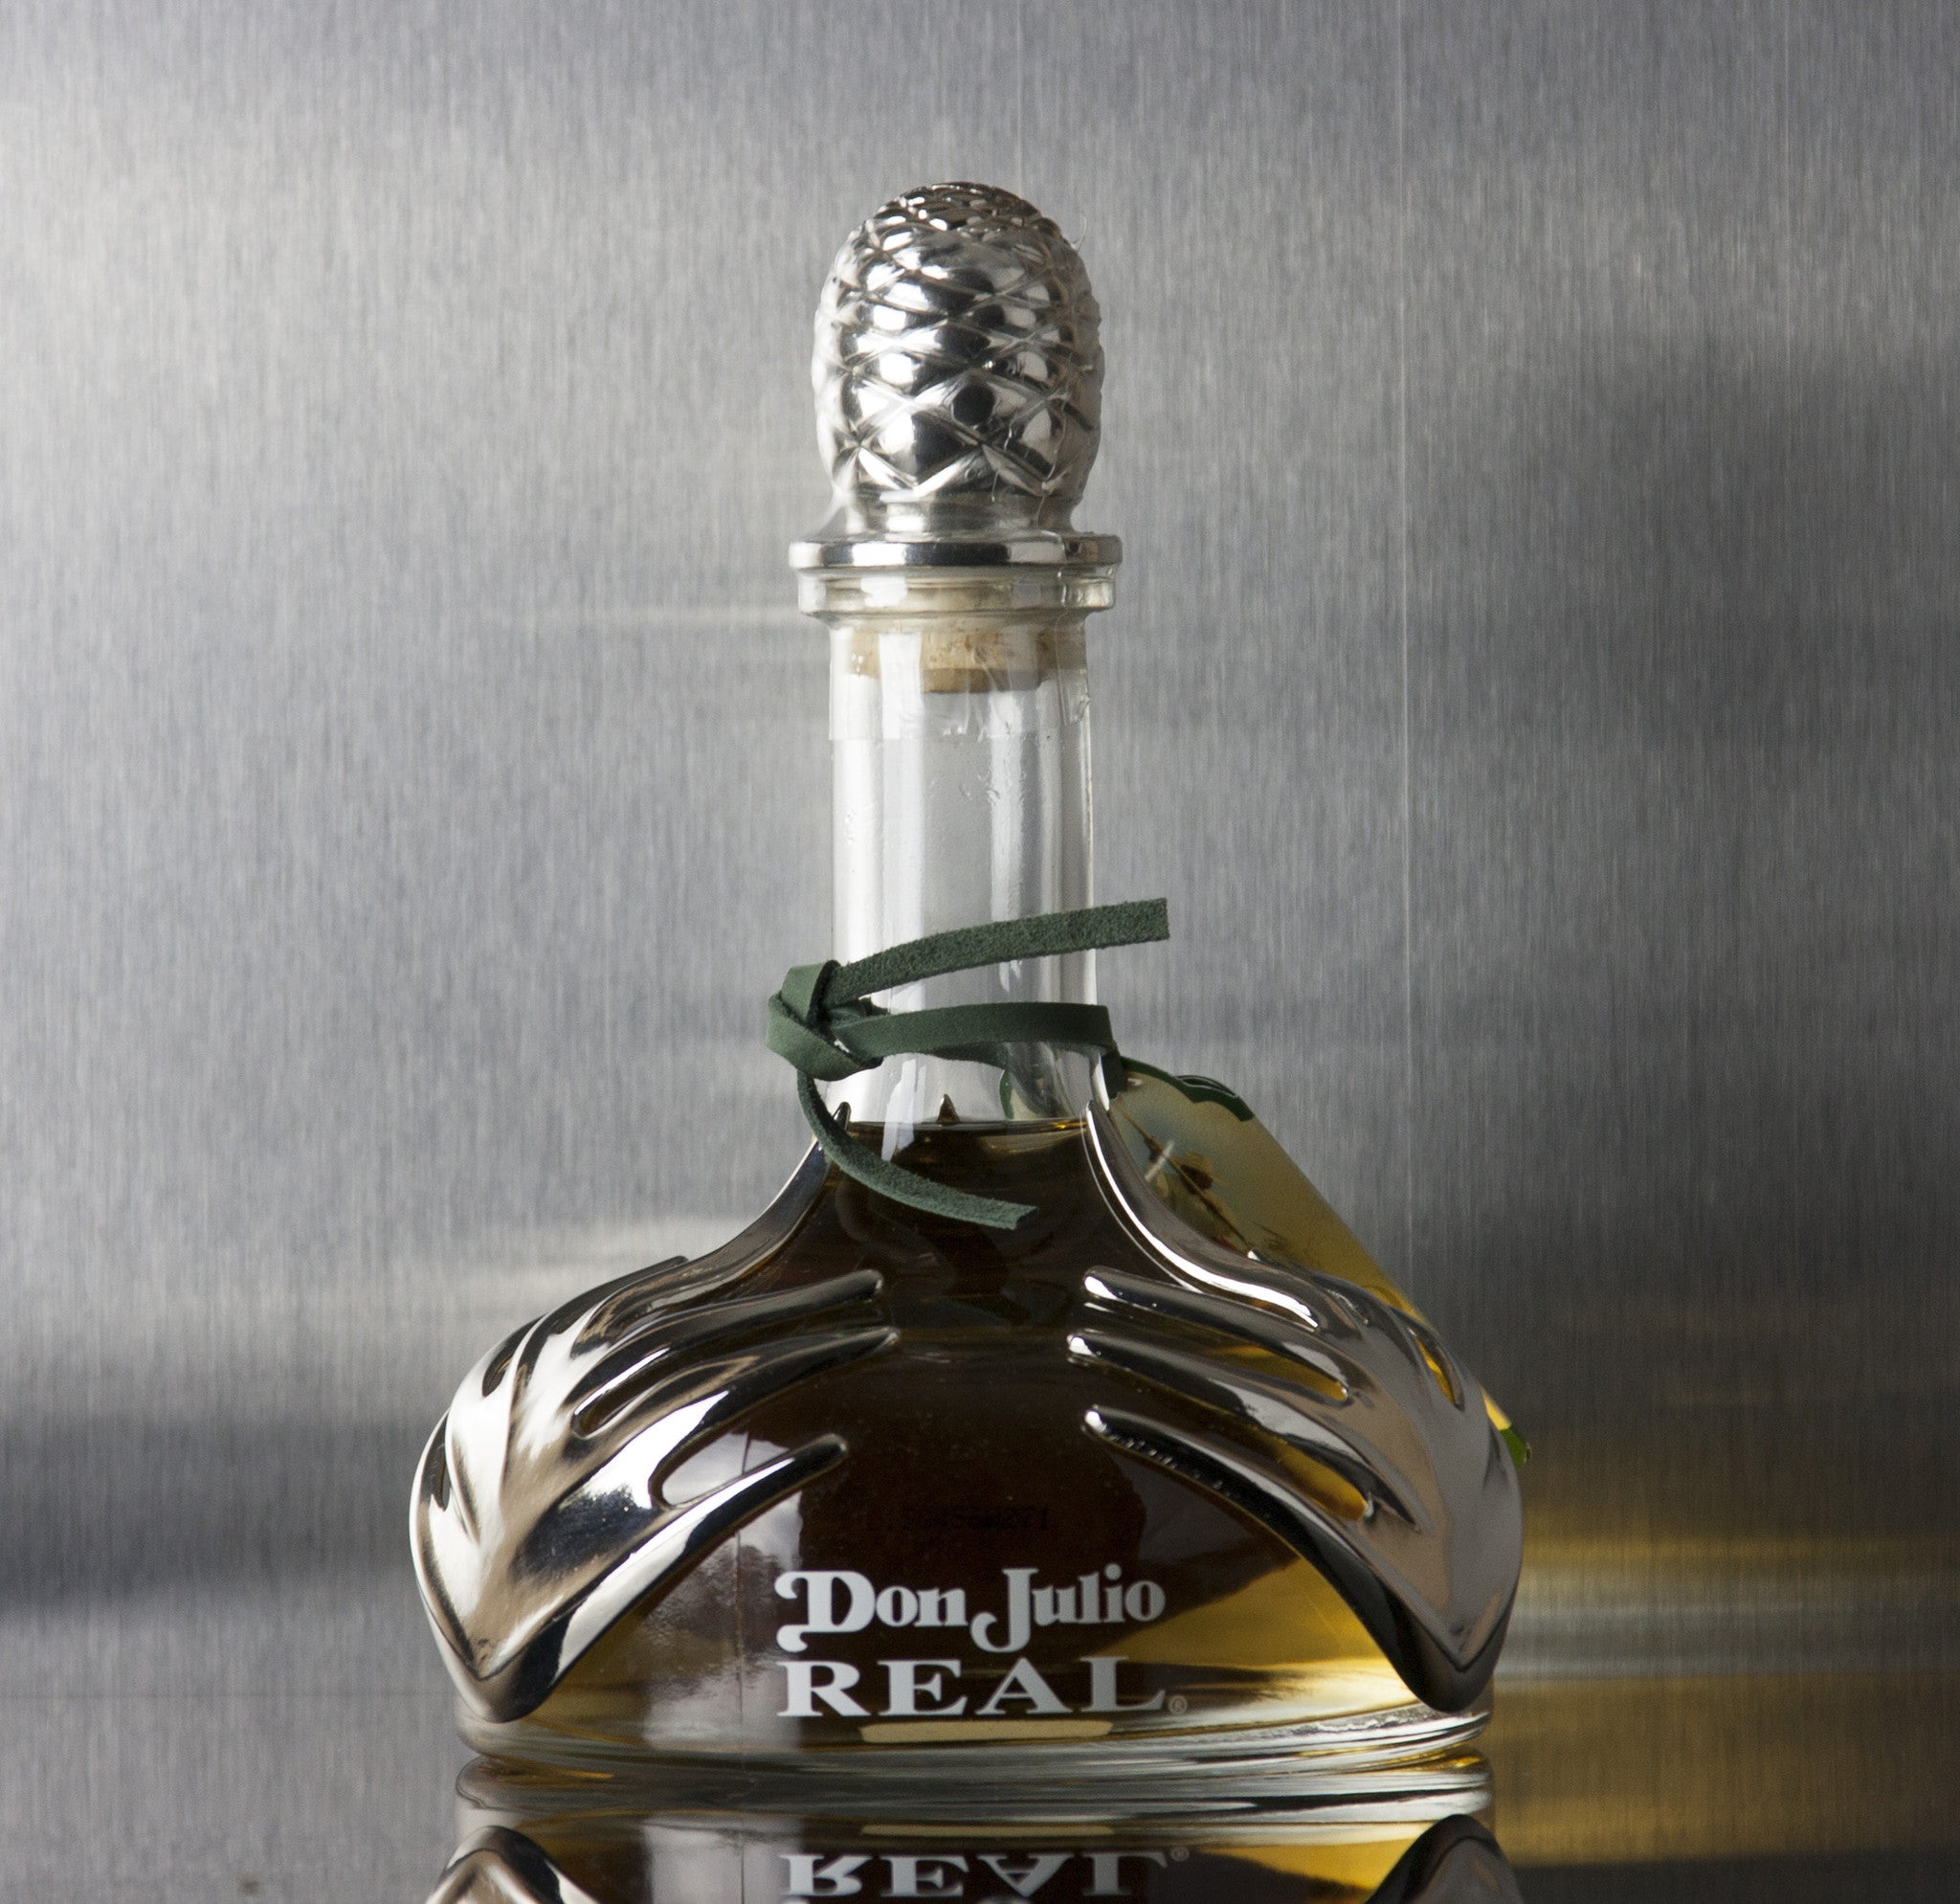 Don Julio REAL Tequila 750 ml